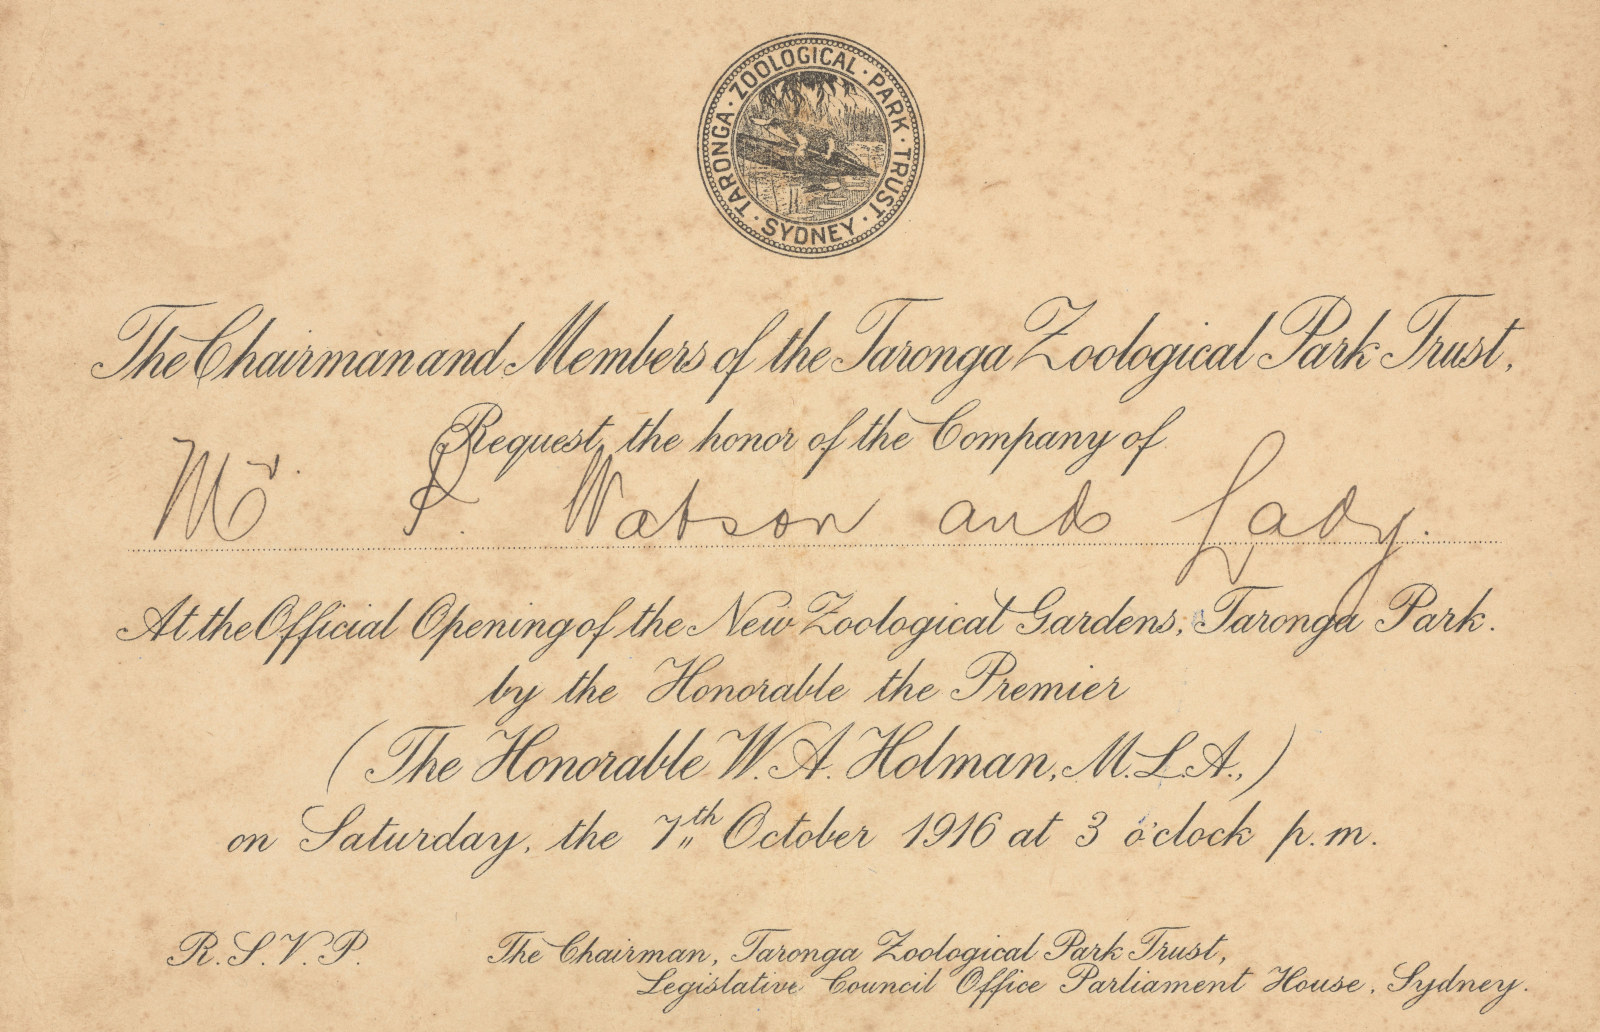 Invitation to the official opening of Taronga Zoo, 1916.